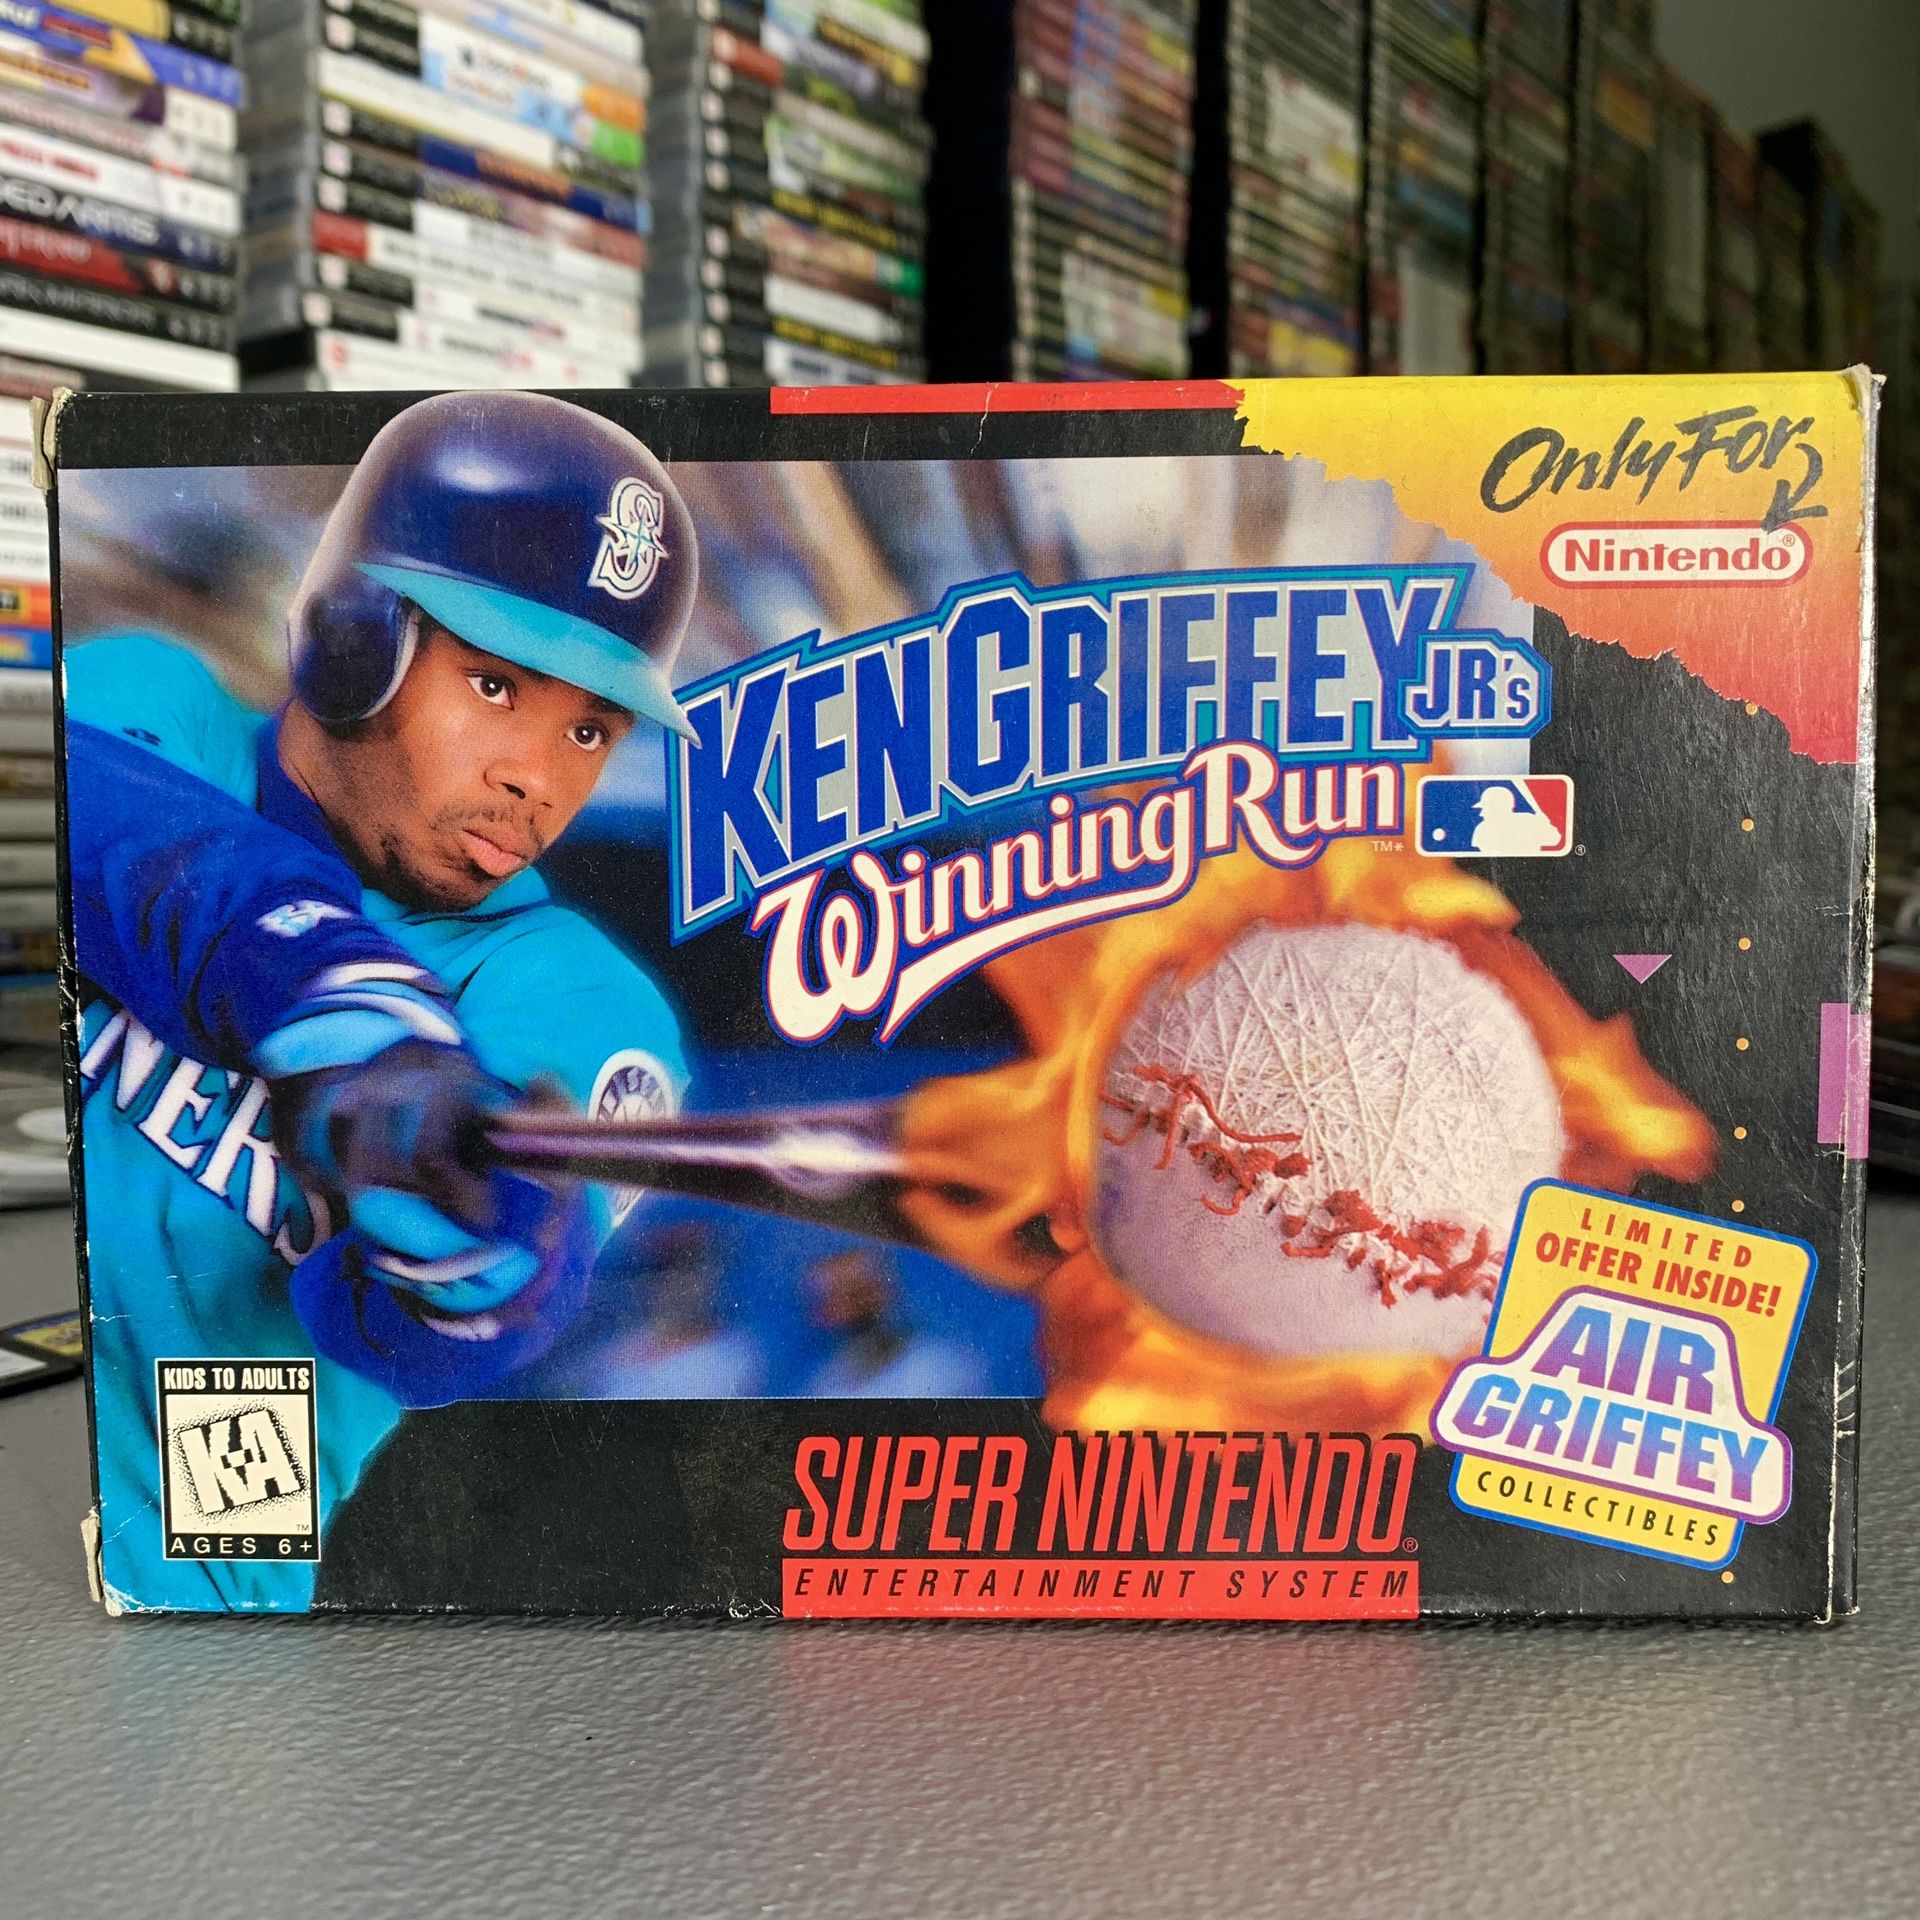 Ken Griffey Jr.'s Winning Run (Super Nintendo Entertainment System, 1996)  *TRADE IN YOUR OLD GAMES FOR CSH OR CREDIT HERE/WE FIX SYSTEMS*